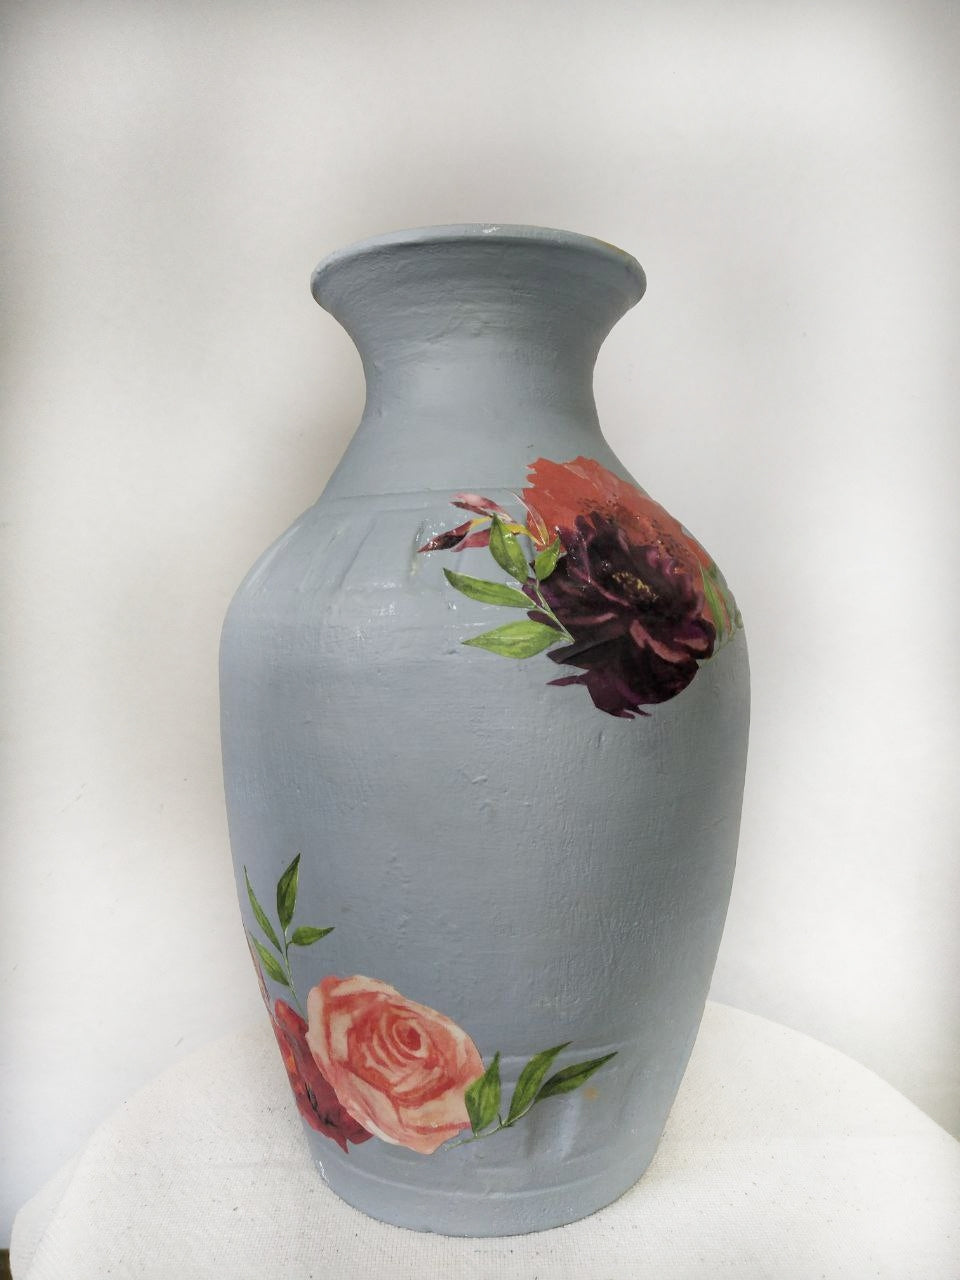 Hand painted Pot with Decoupage Floral Design